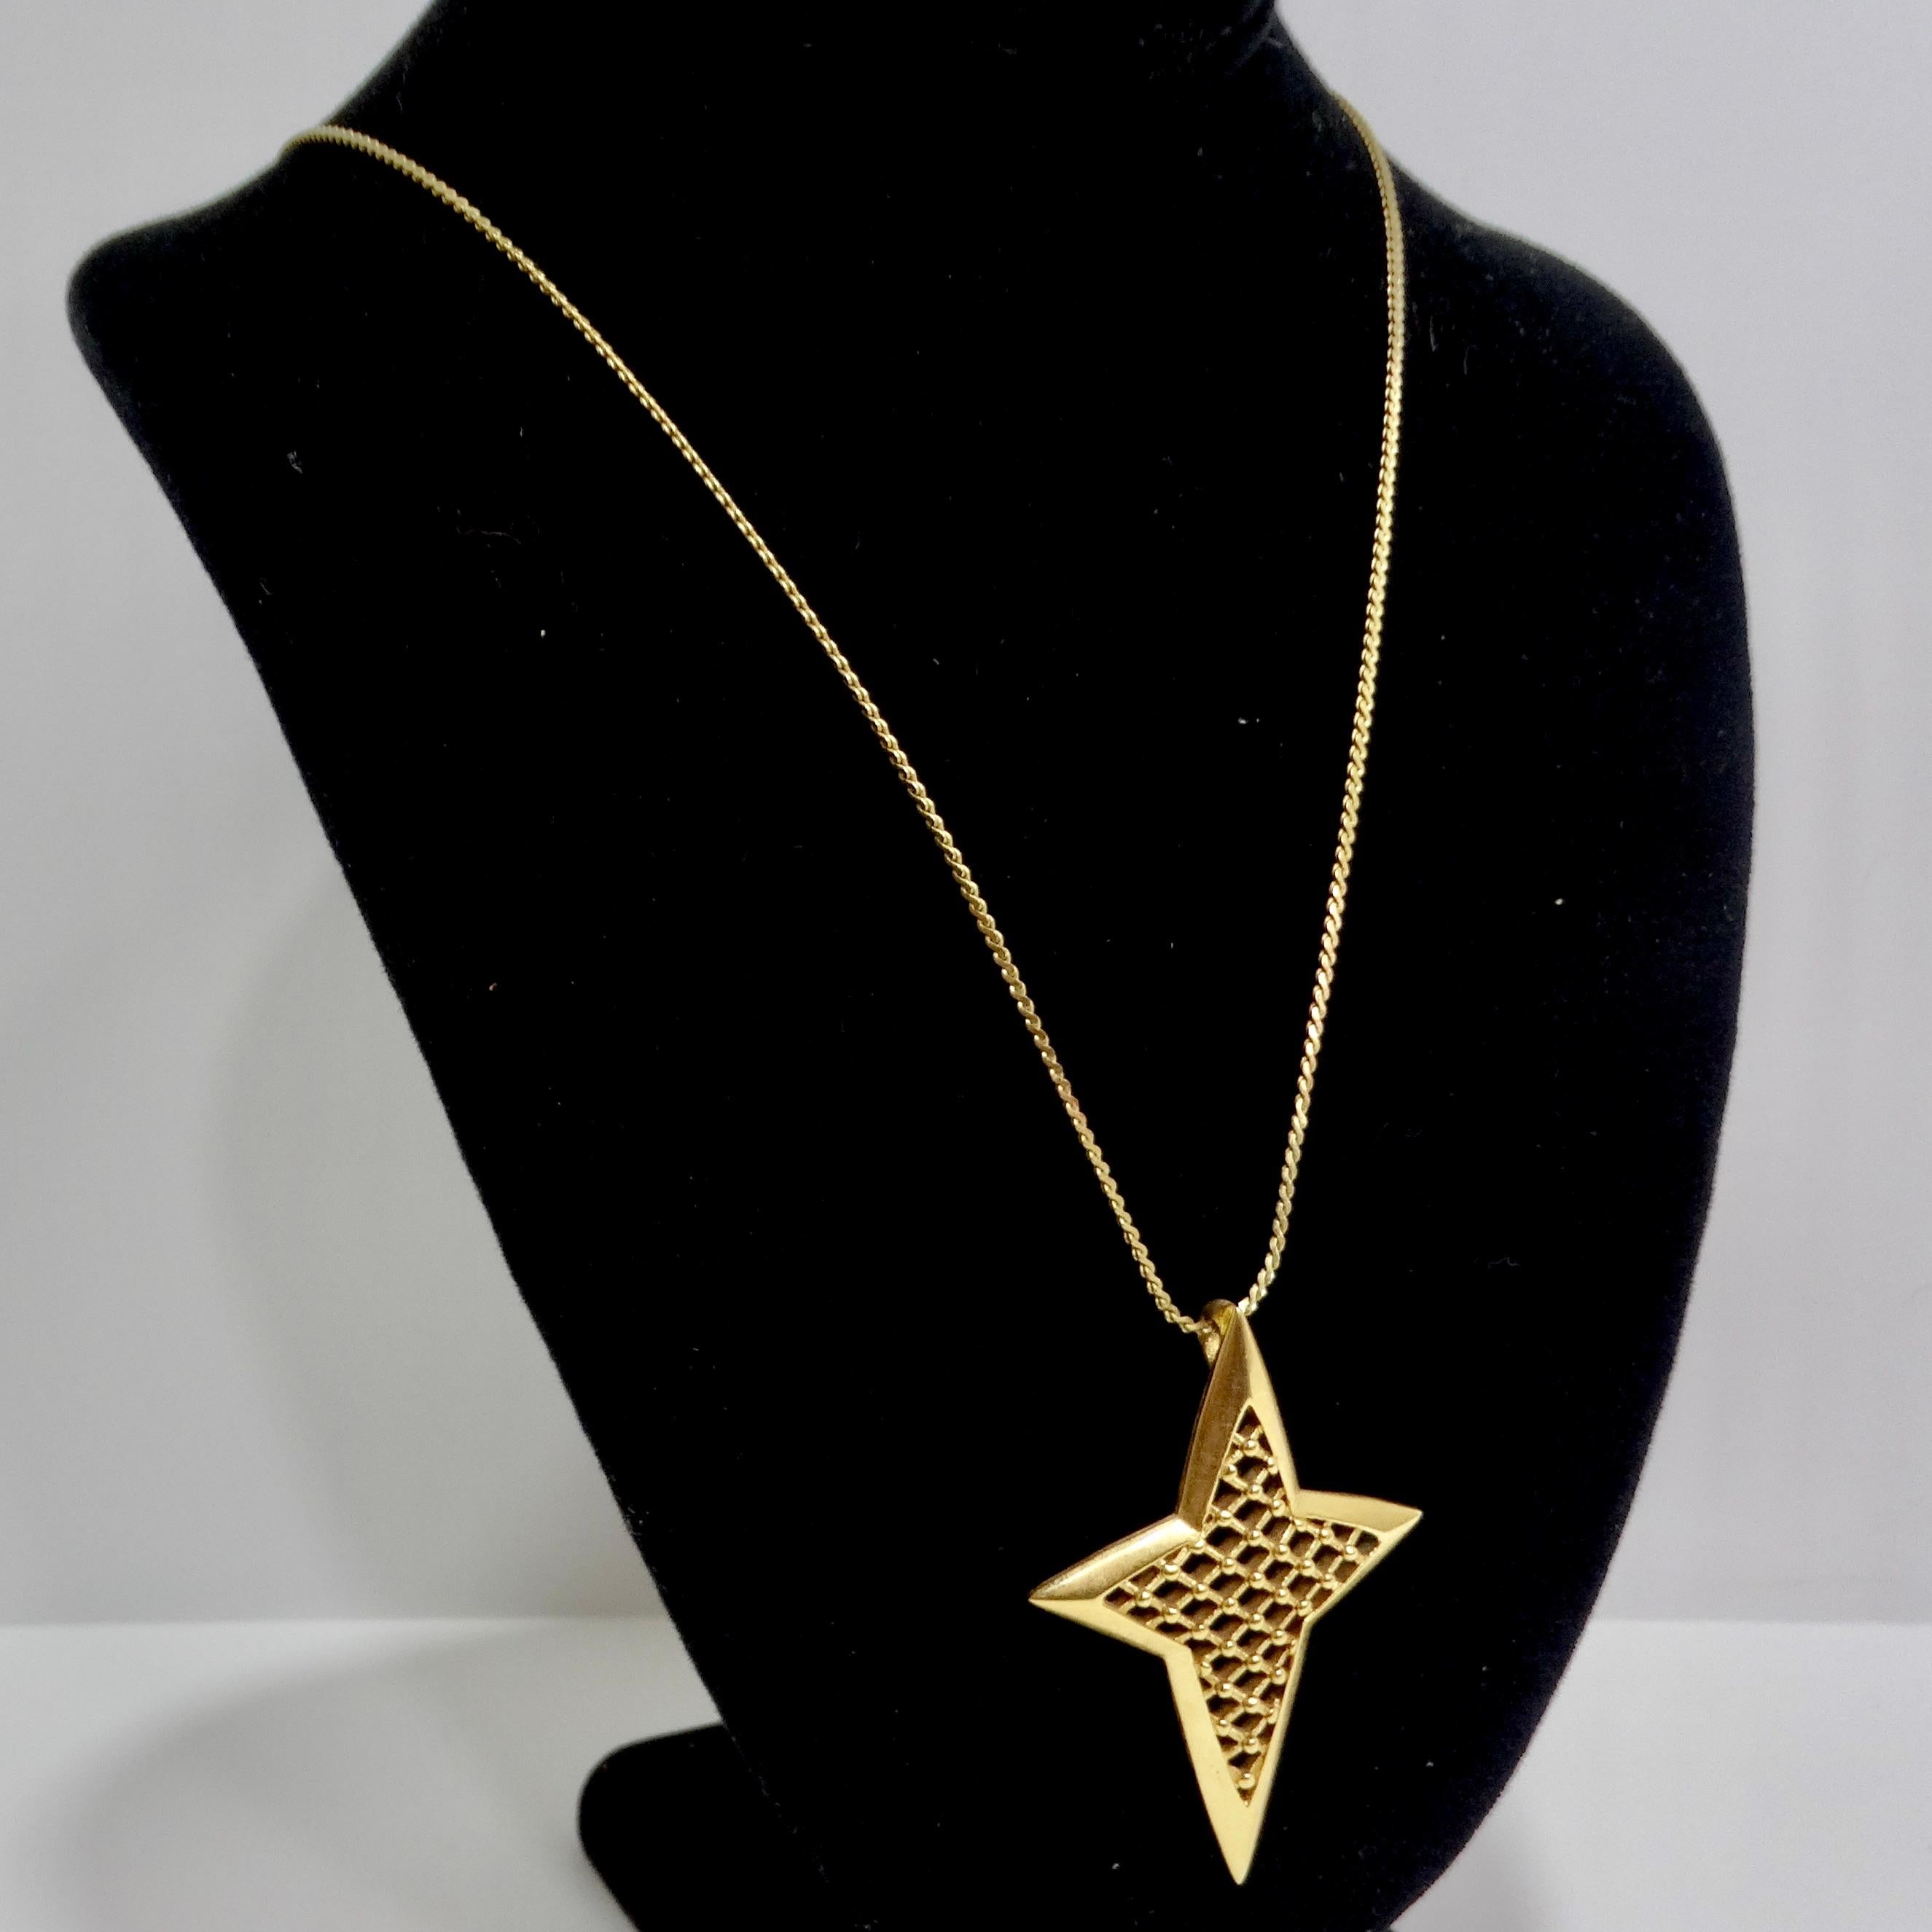 Trifari Gold Tone Star Pendent Necklace In Excellent Condition For Sale In Scottsdale, AZ